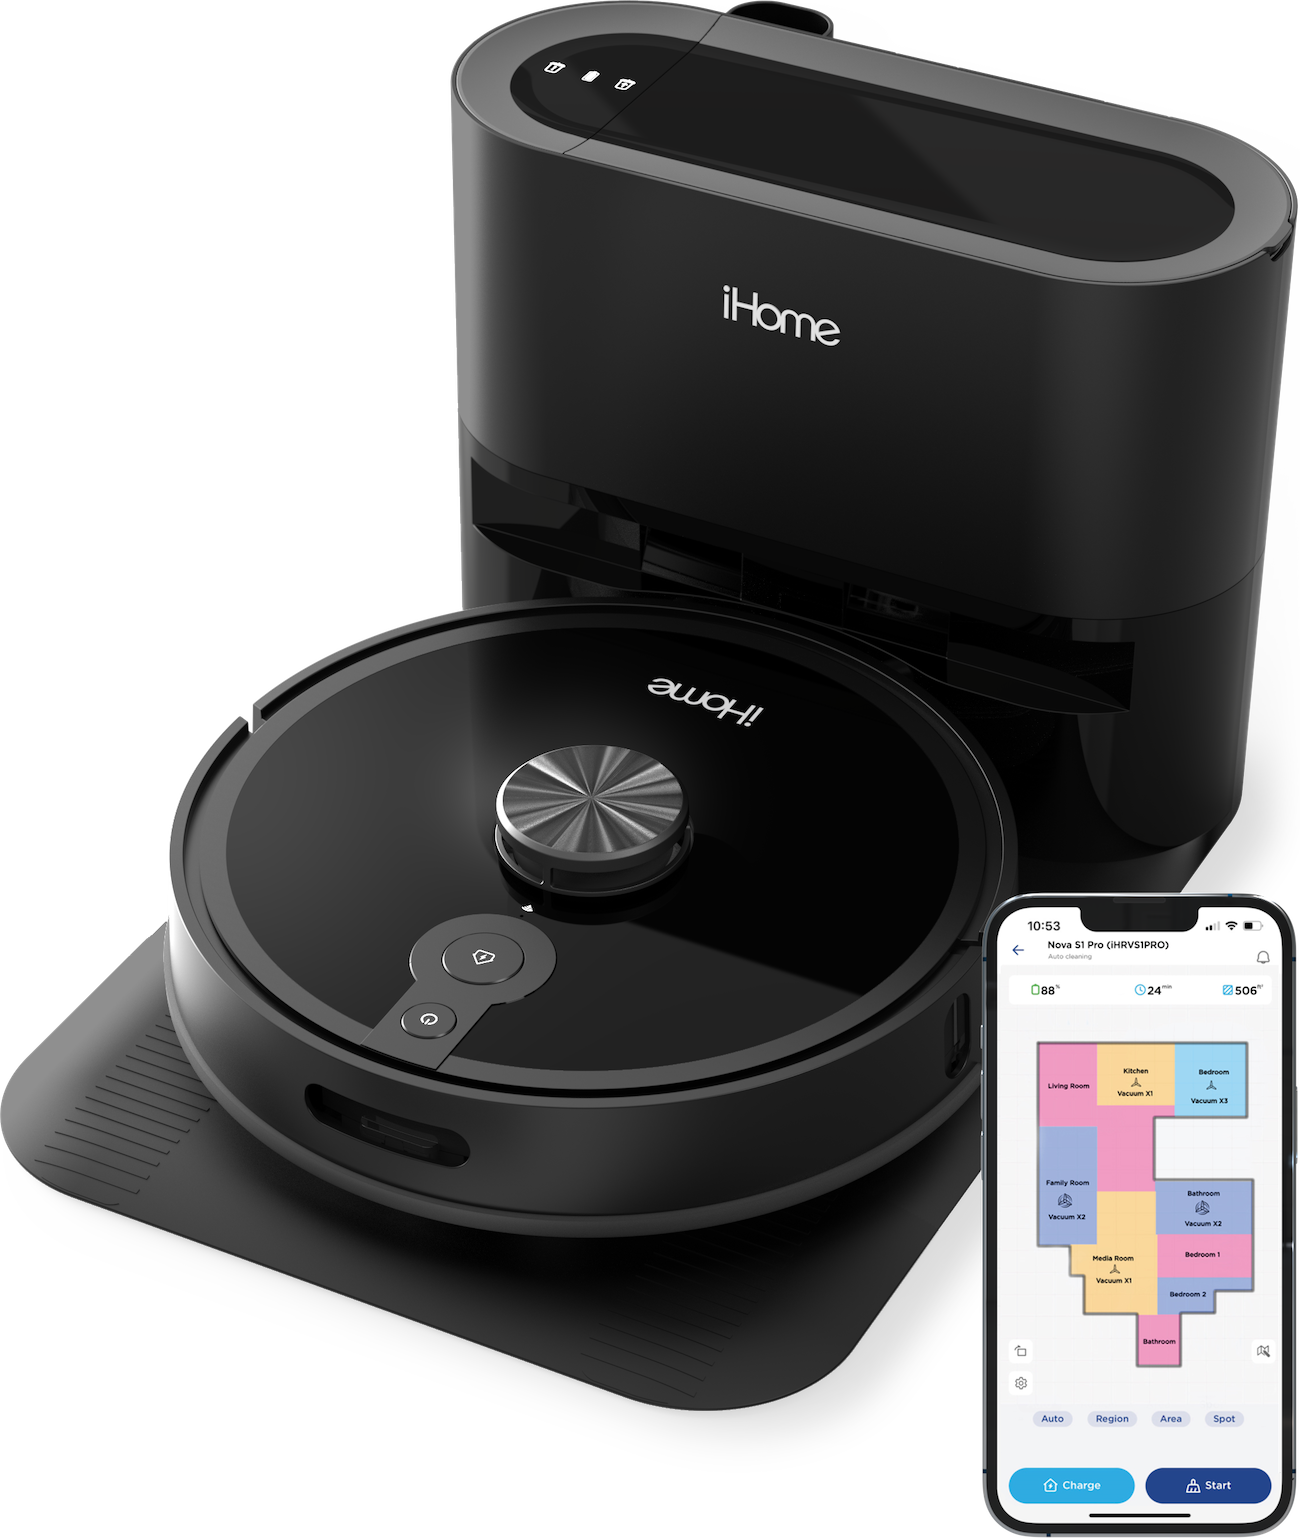 iHome AutoVac Nova S1 Pro Self Empty Robot Vacuum, LIDAR Mapping, 150 Min Runtime, Strong Suction, New - image 1 of 14